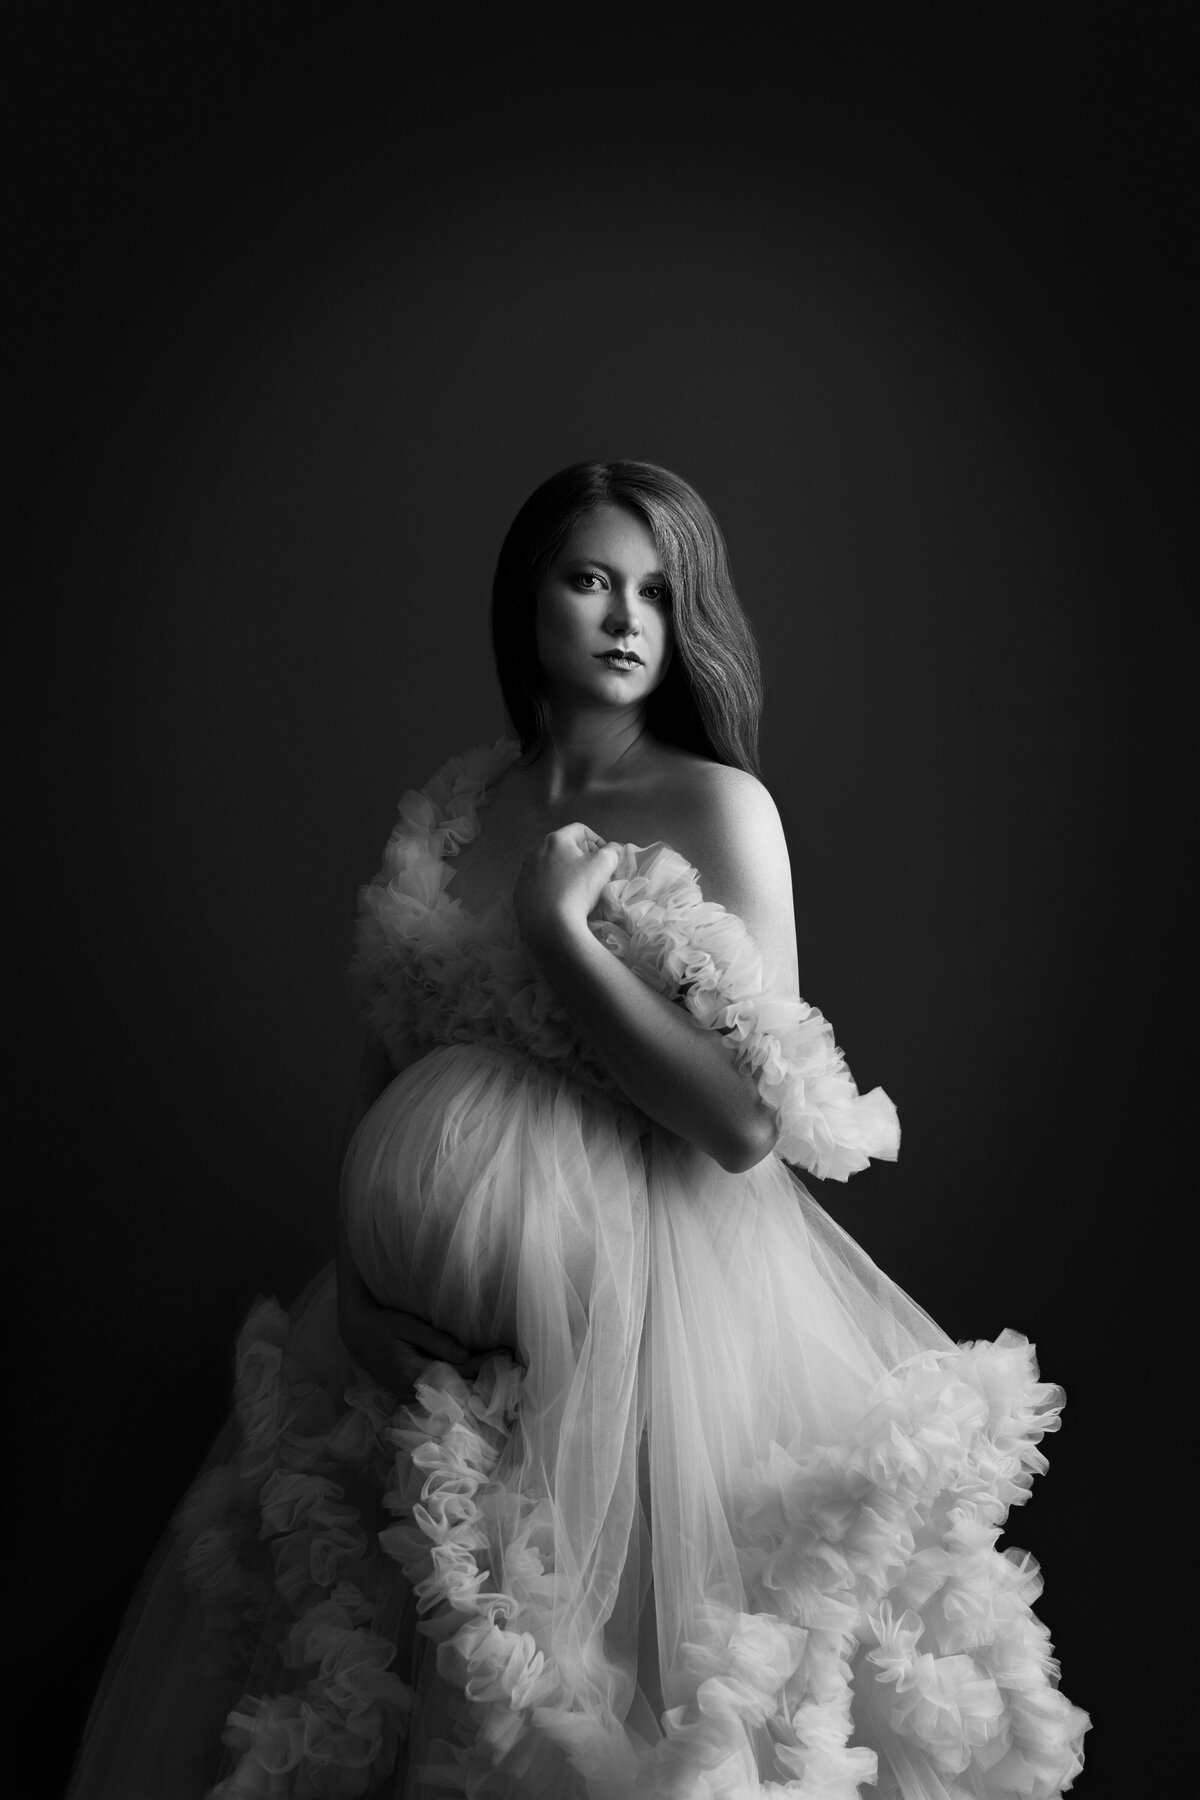 Black and white maternity photo taken by Katie Marshall, recognized as the best Main Line maternity photographer. The image features a woman in an elegant tulle maternity photoshoot gown with embellished ruching at the hem, gracefully draped off her shoulders. She delicately touches her shoulder with one hand, while the other cradles her baby bump. With her hair pushed behind her back, she gazes over her shoulder towards the camera, creating a timeless and evocative maternity portrait.